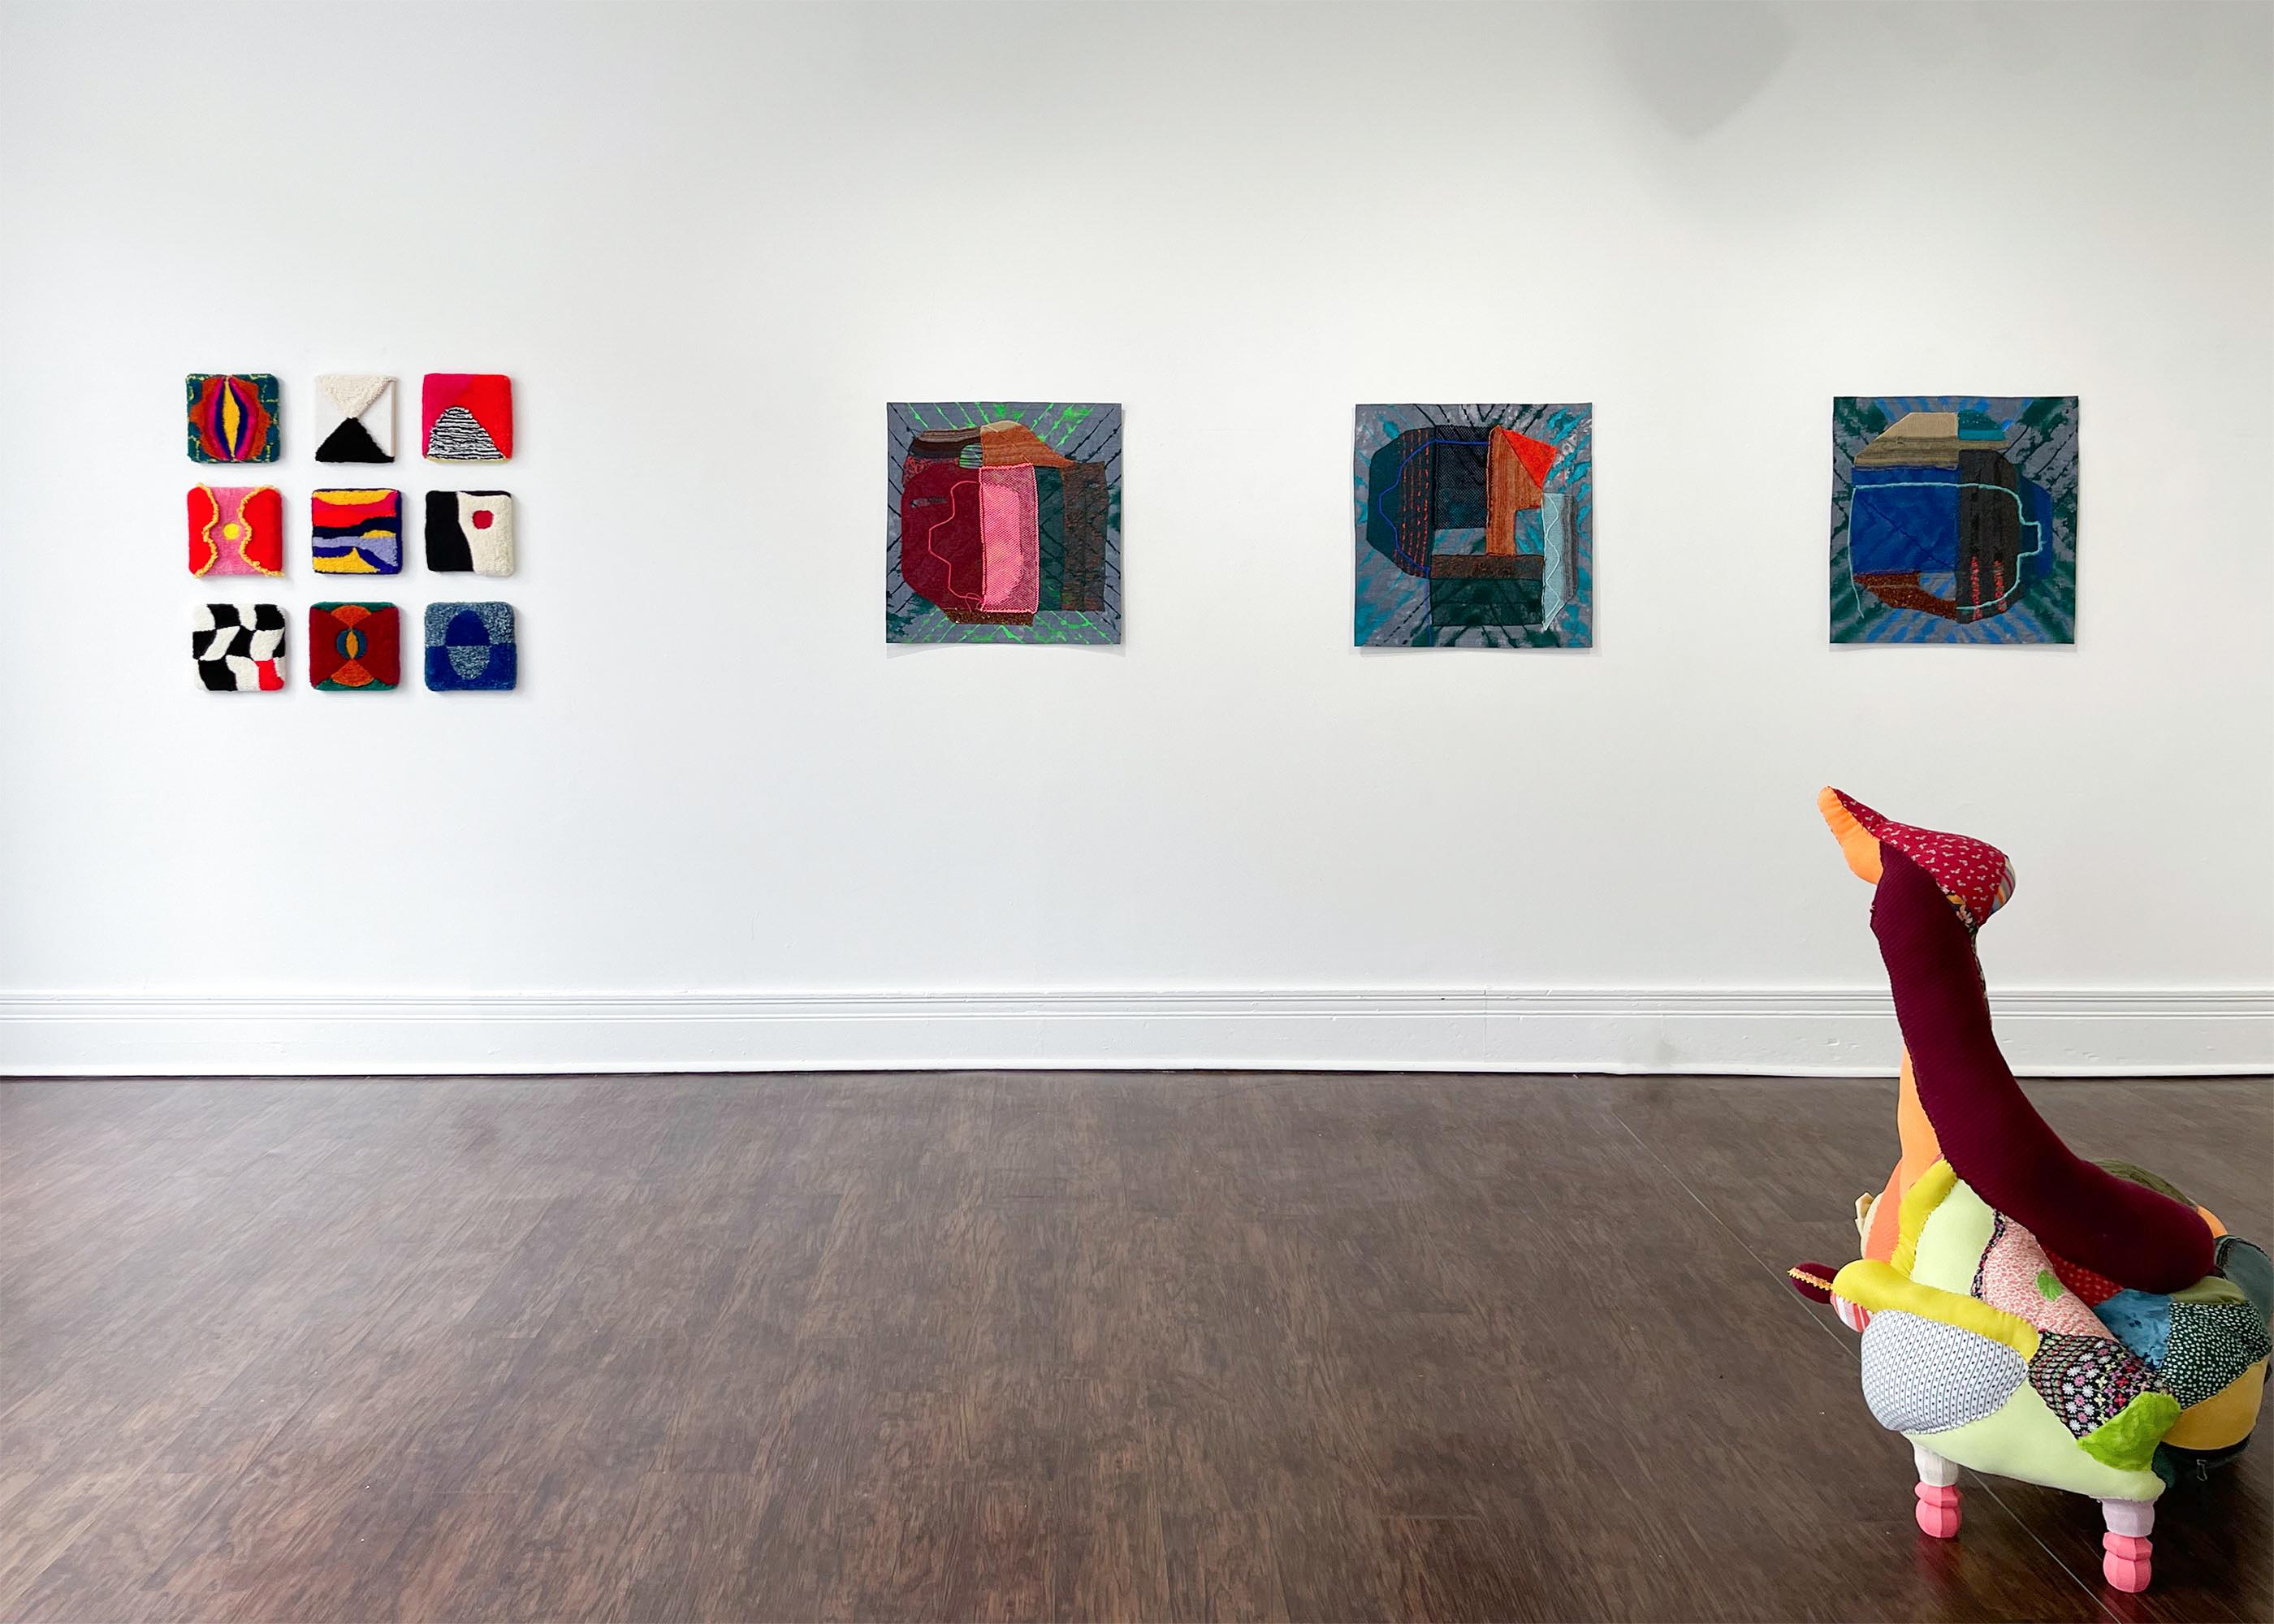 Recycled textiles, thread, batting, wood, chair legs, acrylic paint
40 x 50 x 22 inches

Artist Statement
I hand-sew compound sculptural forms that are constructed from clothing, furniture, household items, and other utilitarian materials. My